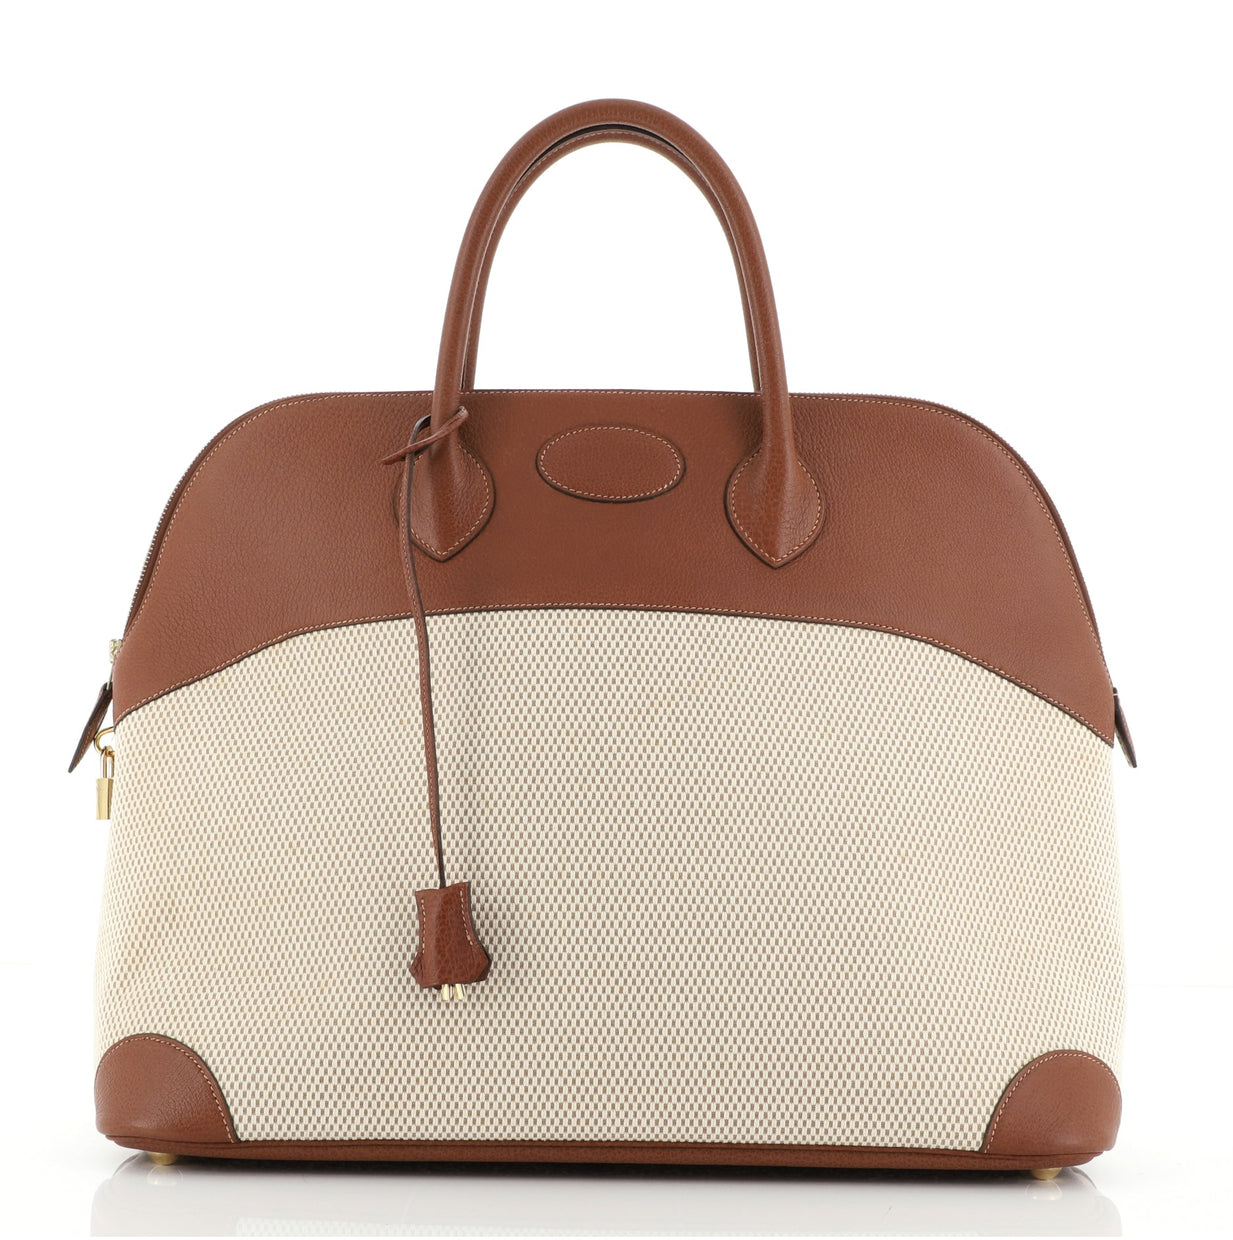 Hermes Bolide Bag Canvas with Leather 45 Brown 6280322